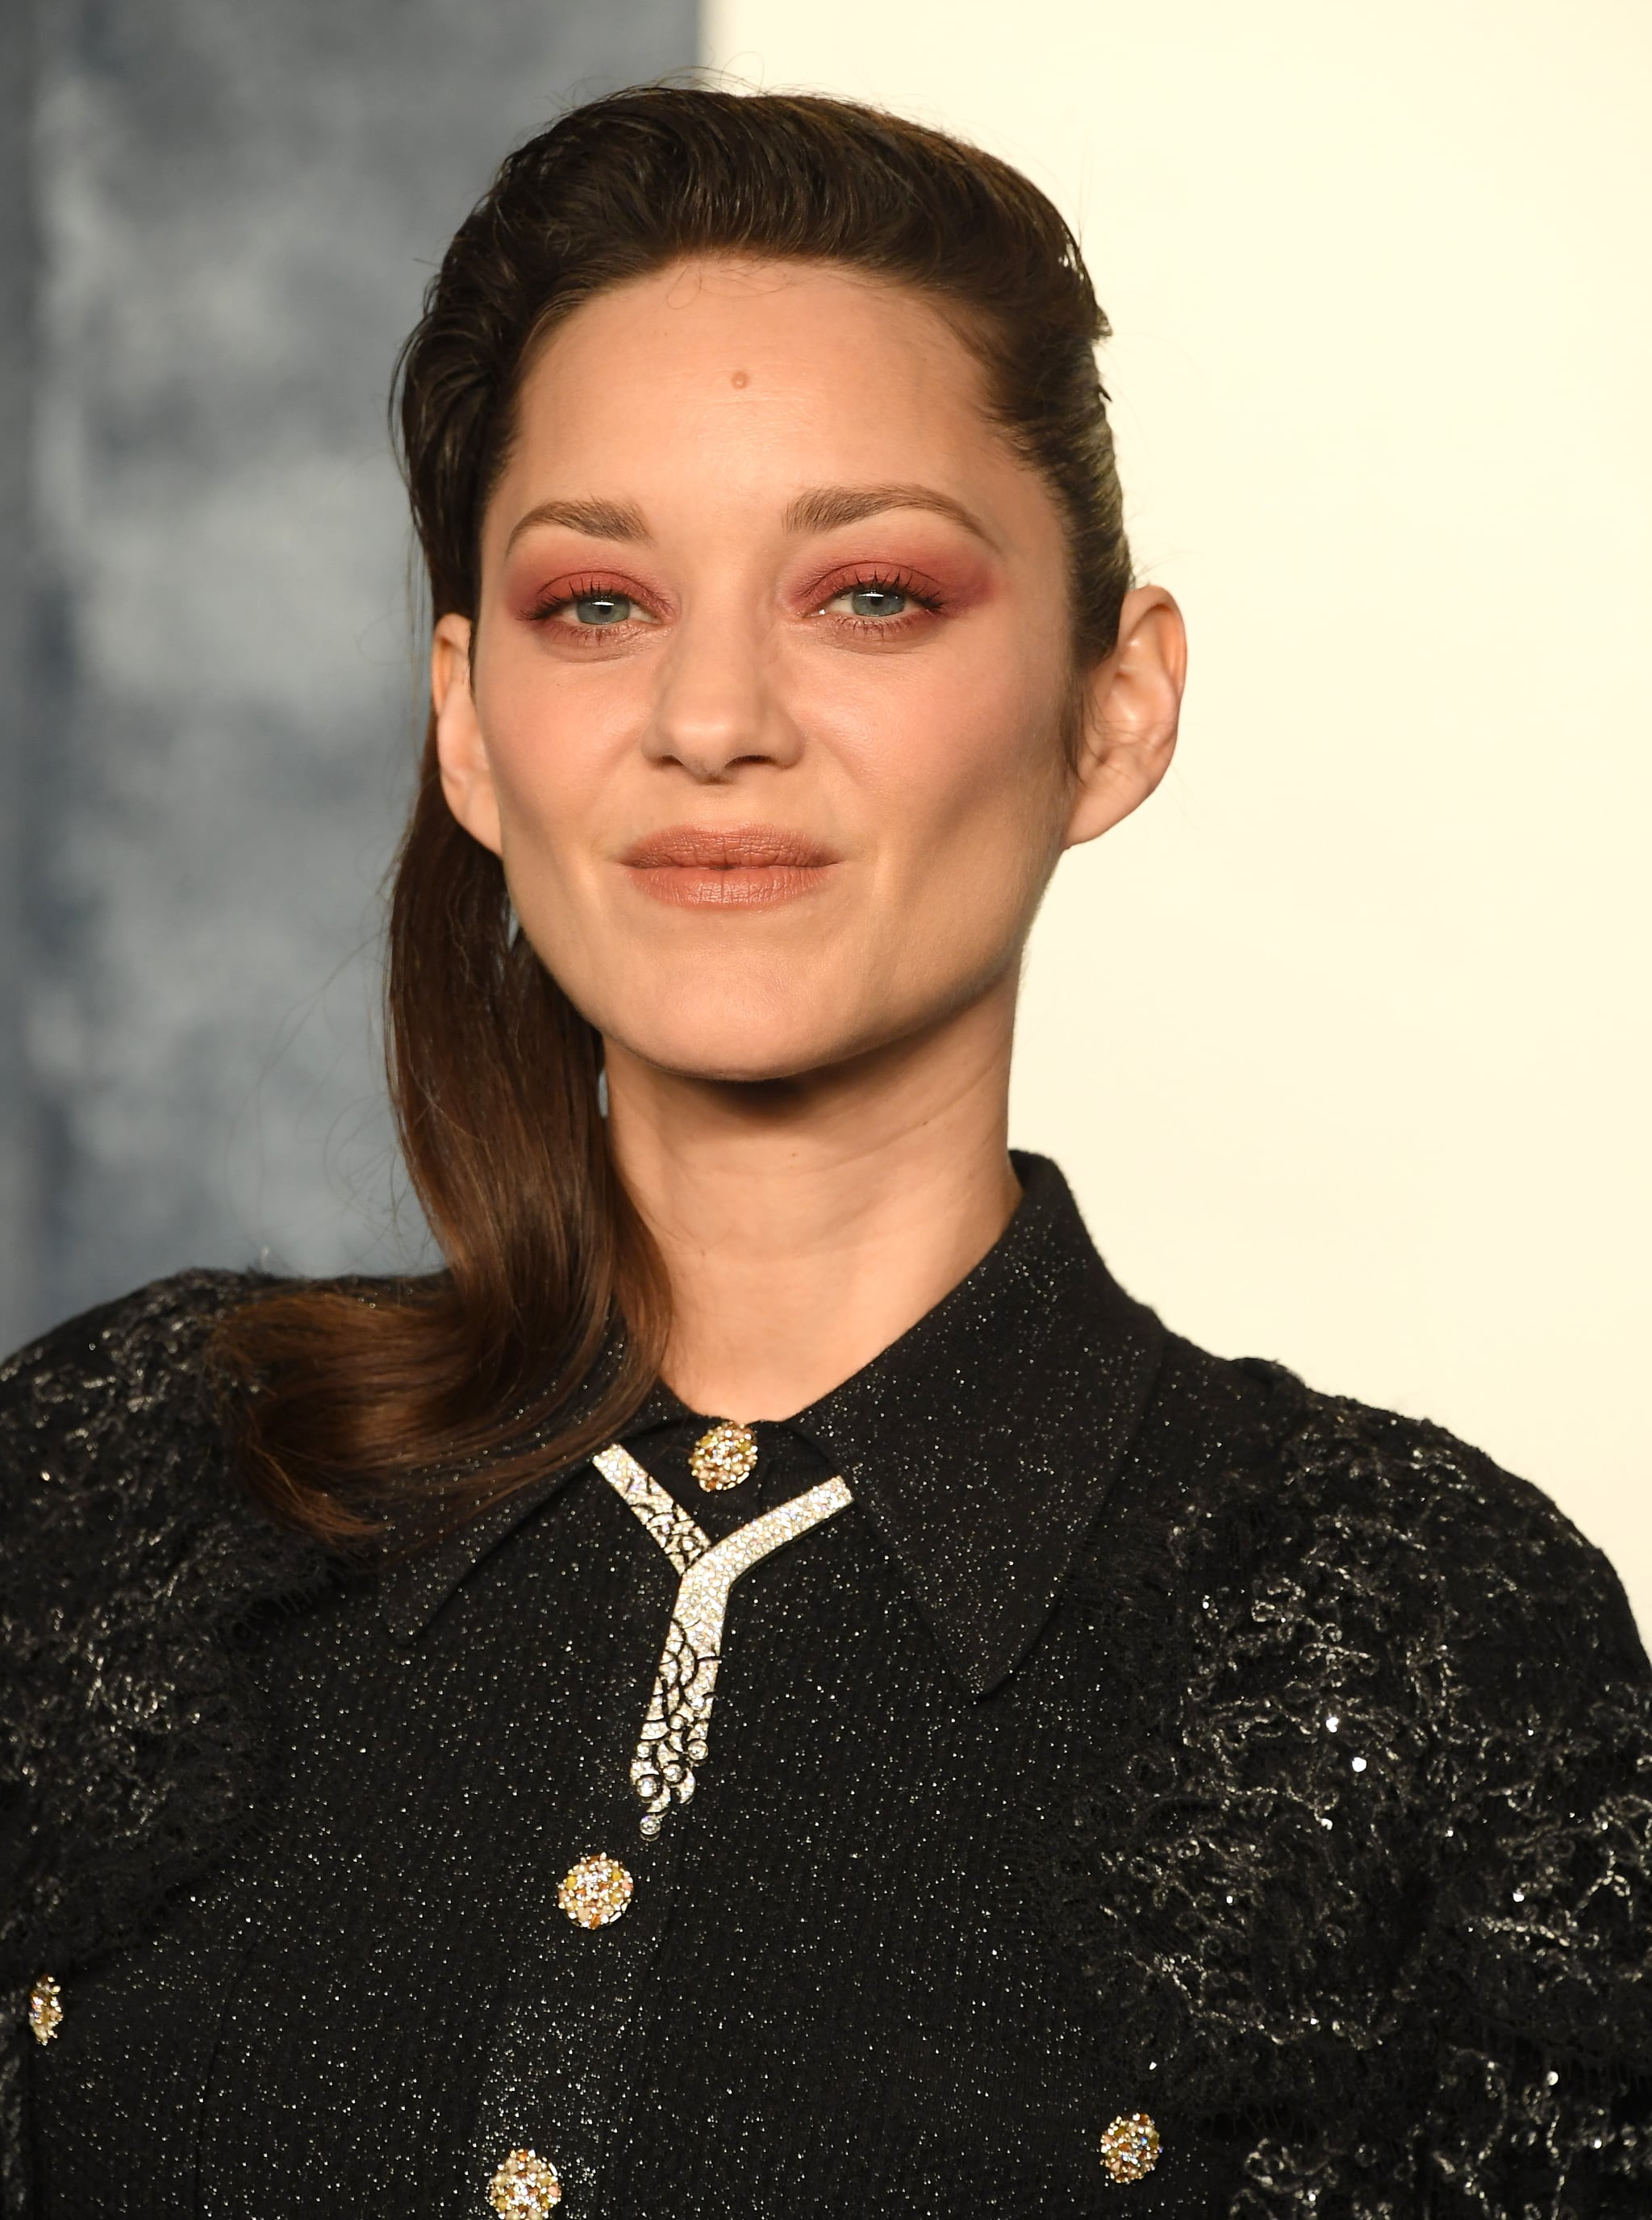 BEVERLY HILLS, CALIFORNIA - MARCH 12: 2023 Marion Cotillard arrives at the Vanity Fair Oscar Party Hosted By Radhika Jones at Wallis Annenberg Centre for the Performing Arts on March 12, 2023 in Beverly Hills, California. (Photo by Steve Granitz/FilmMagic)